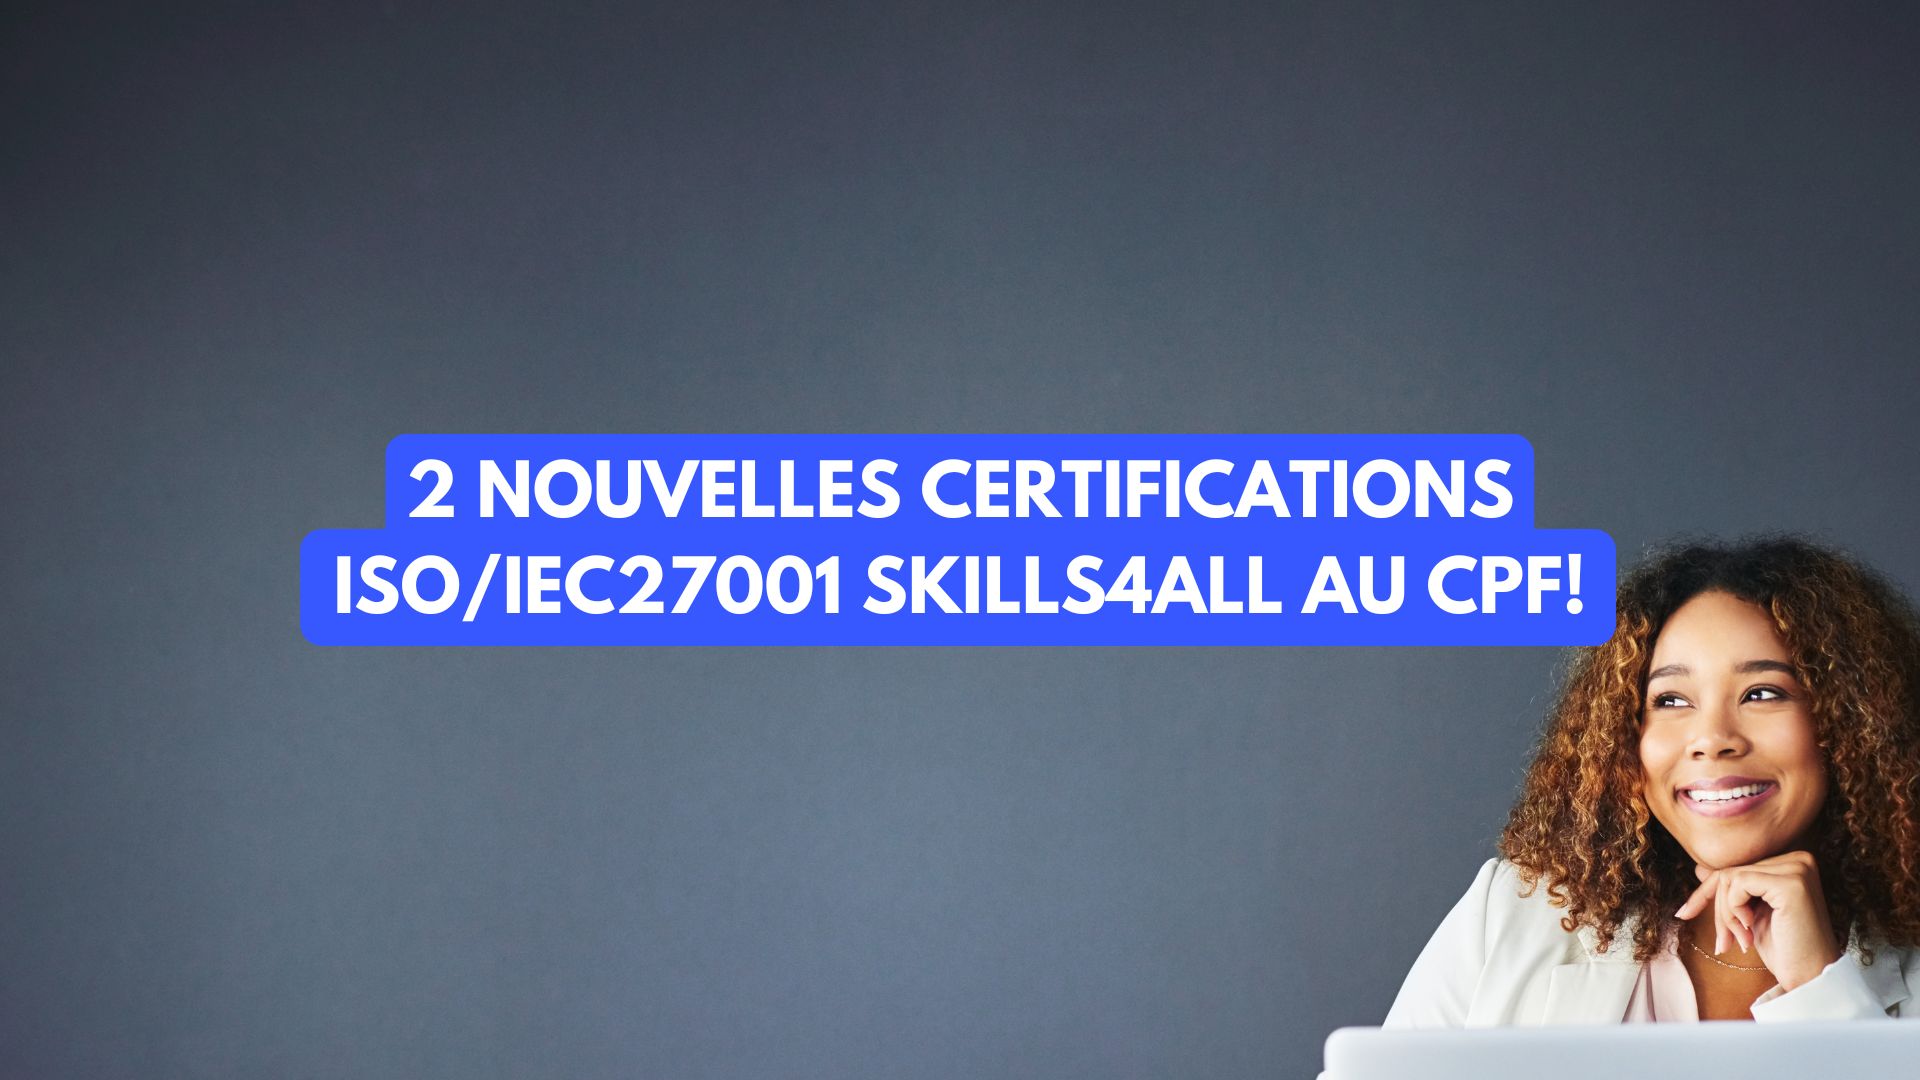 2 nouvelles certifications ISO27001 Skills4All au CPF!